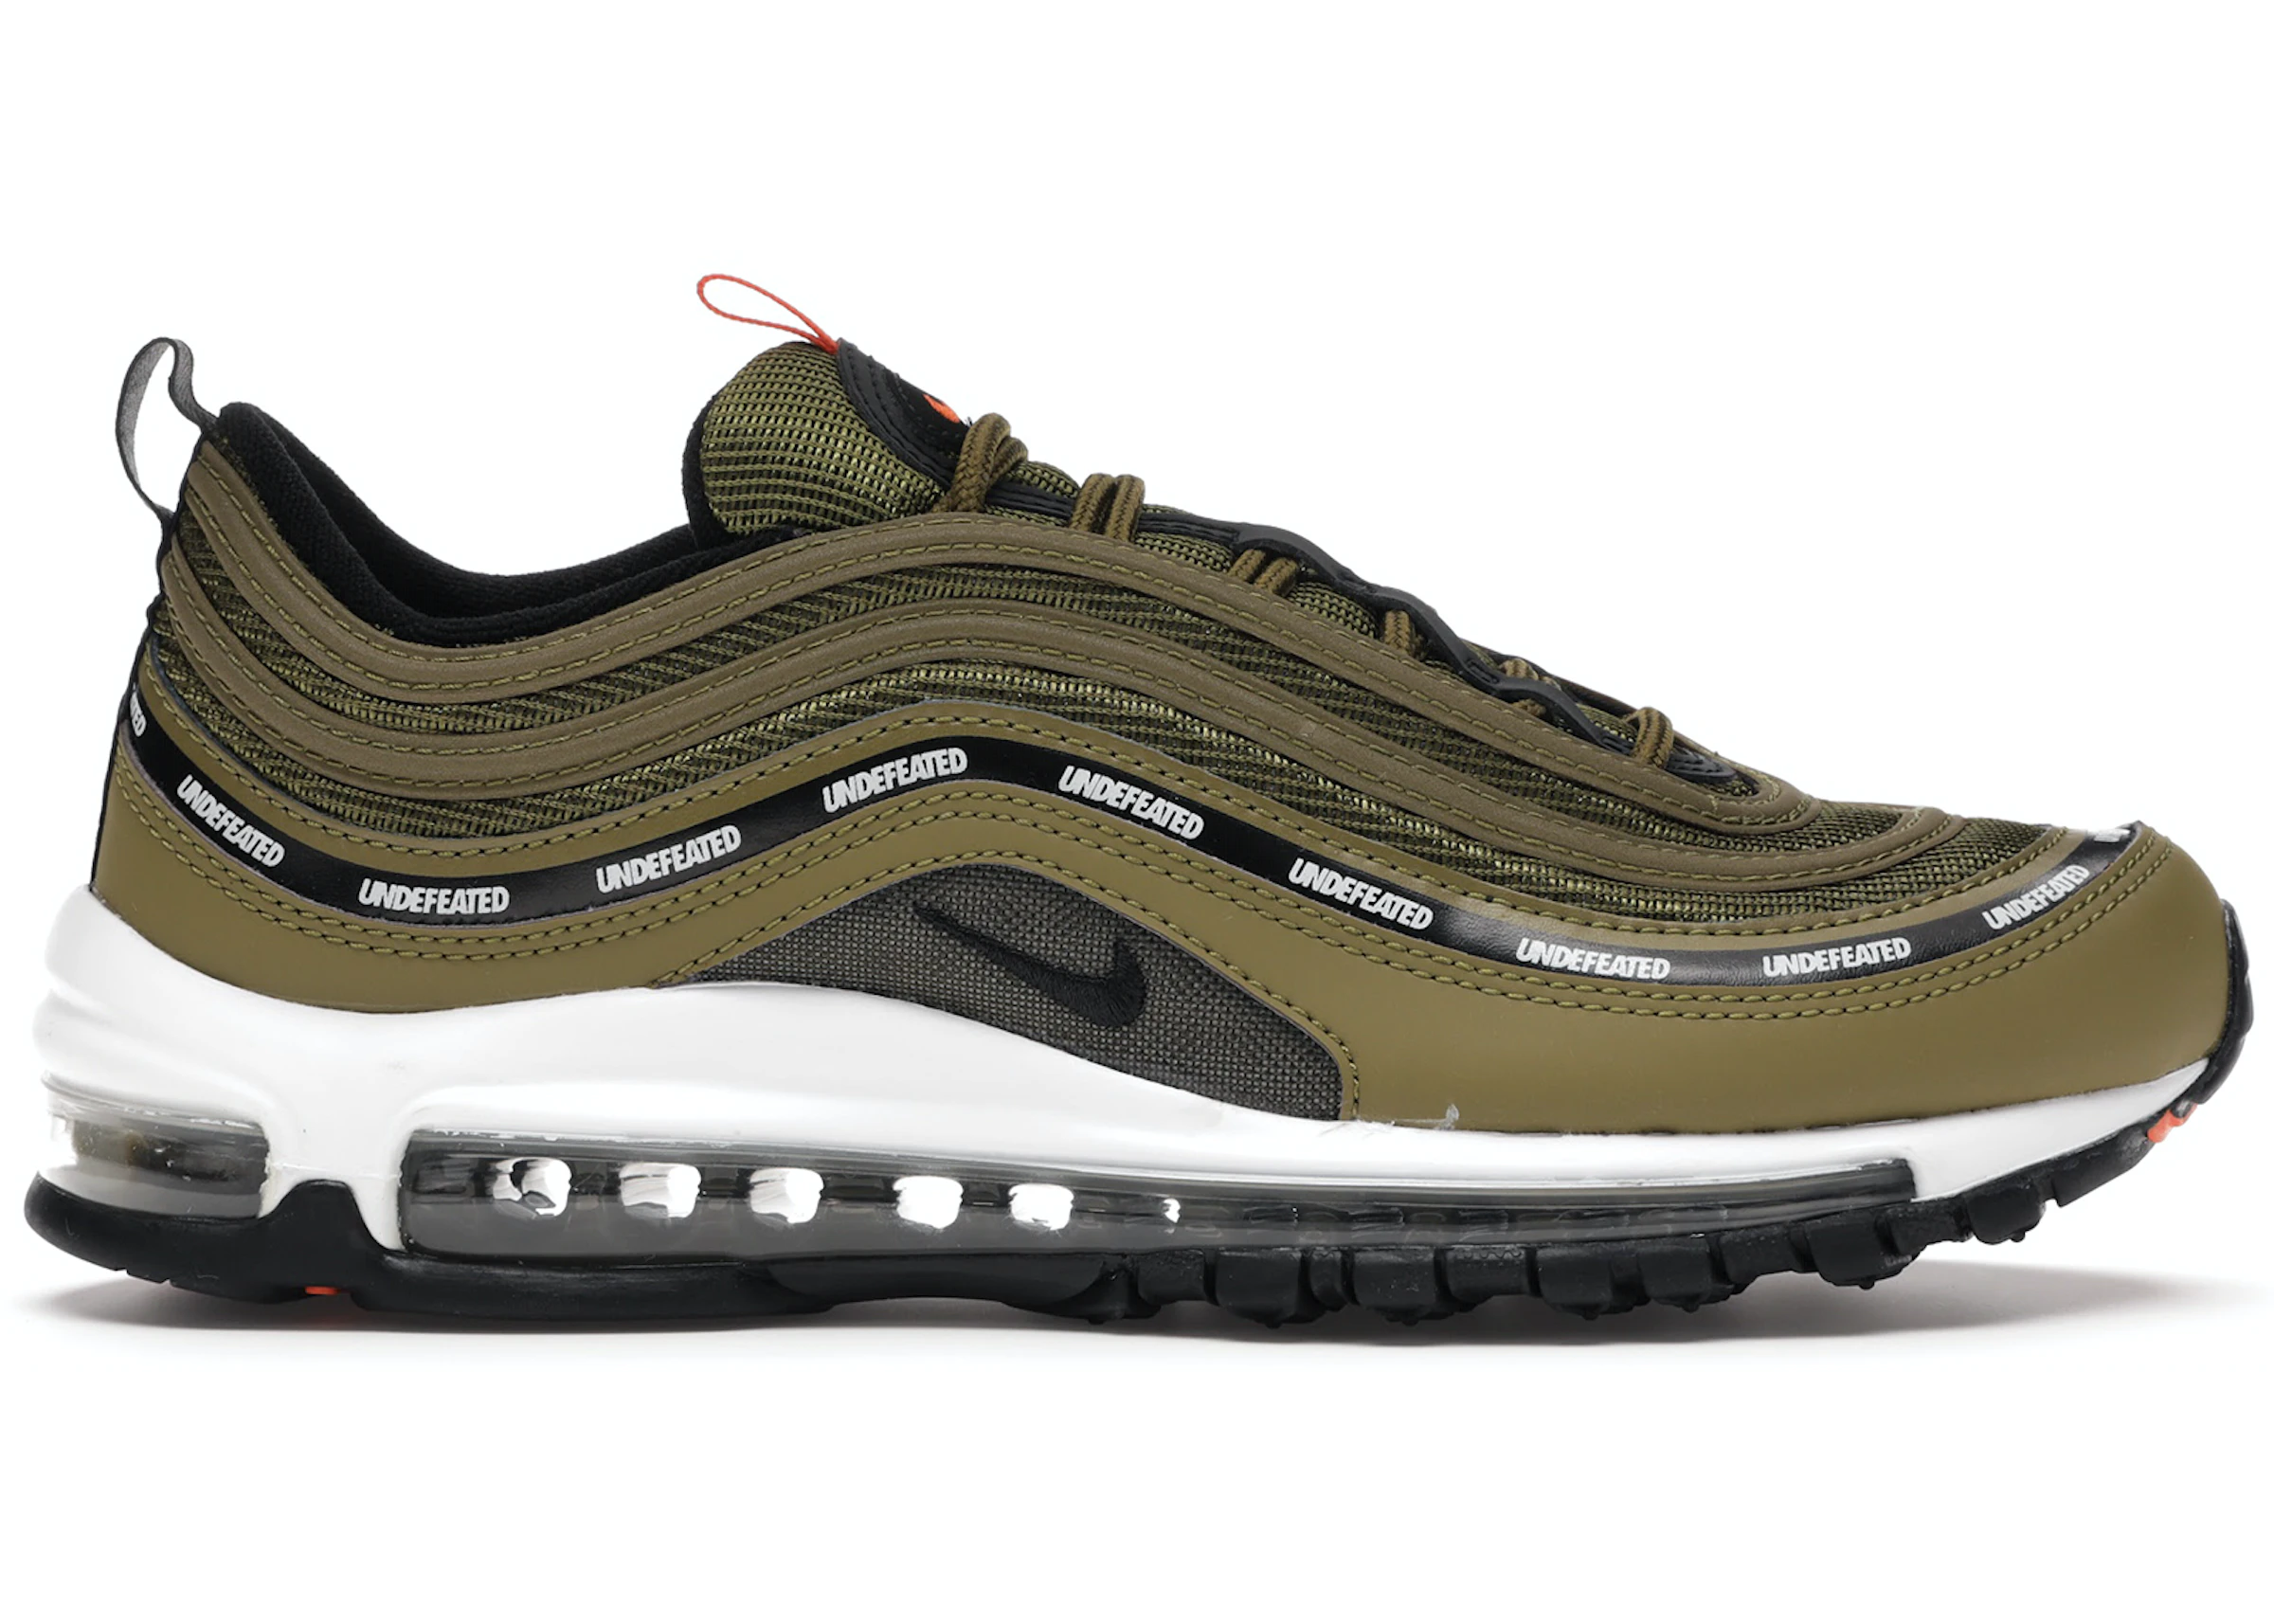 pedestal Materialismo Experto Nike Air Max 97 Undefeated Green (2017) - AJ1986-300 - US